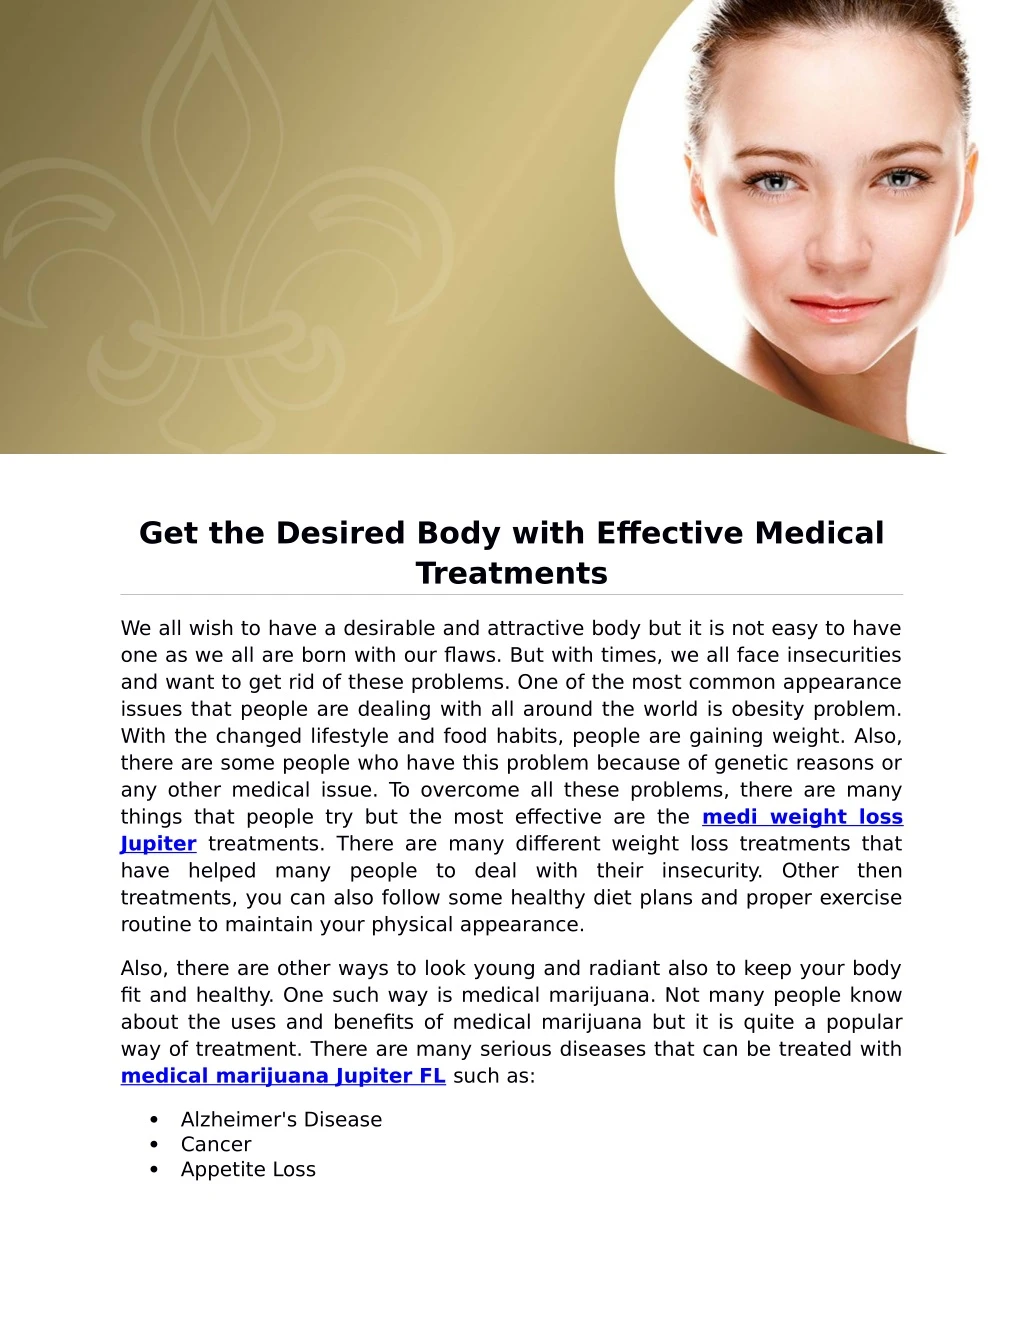 get the desired body with effective medical